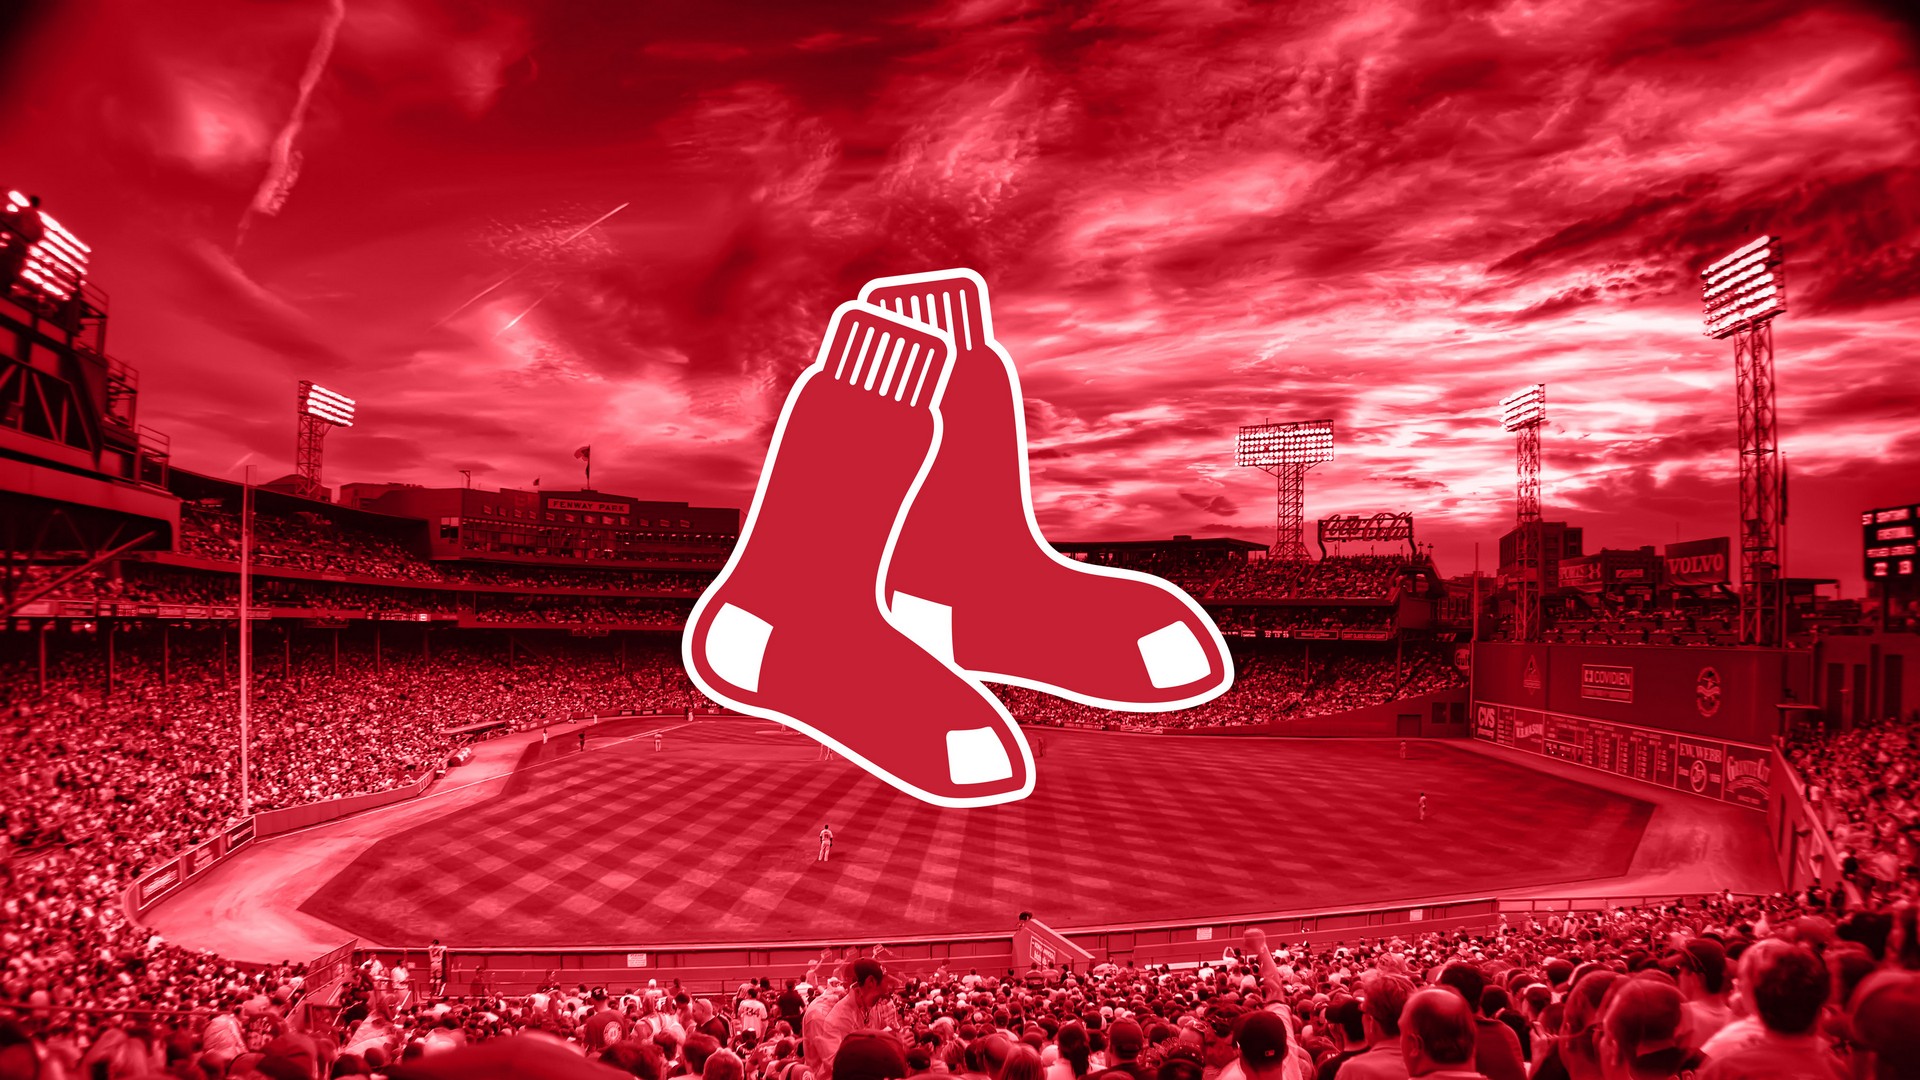 Boston Red Sox HD Wallpapers with high-resolution 1920x1080 pixel. You can use this wallpaper for Mac Desktop Wallpaper, Laptop Screensavers, Android Wallpapers, Tablet or iPhone Home Screen and another mobile phone device